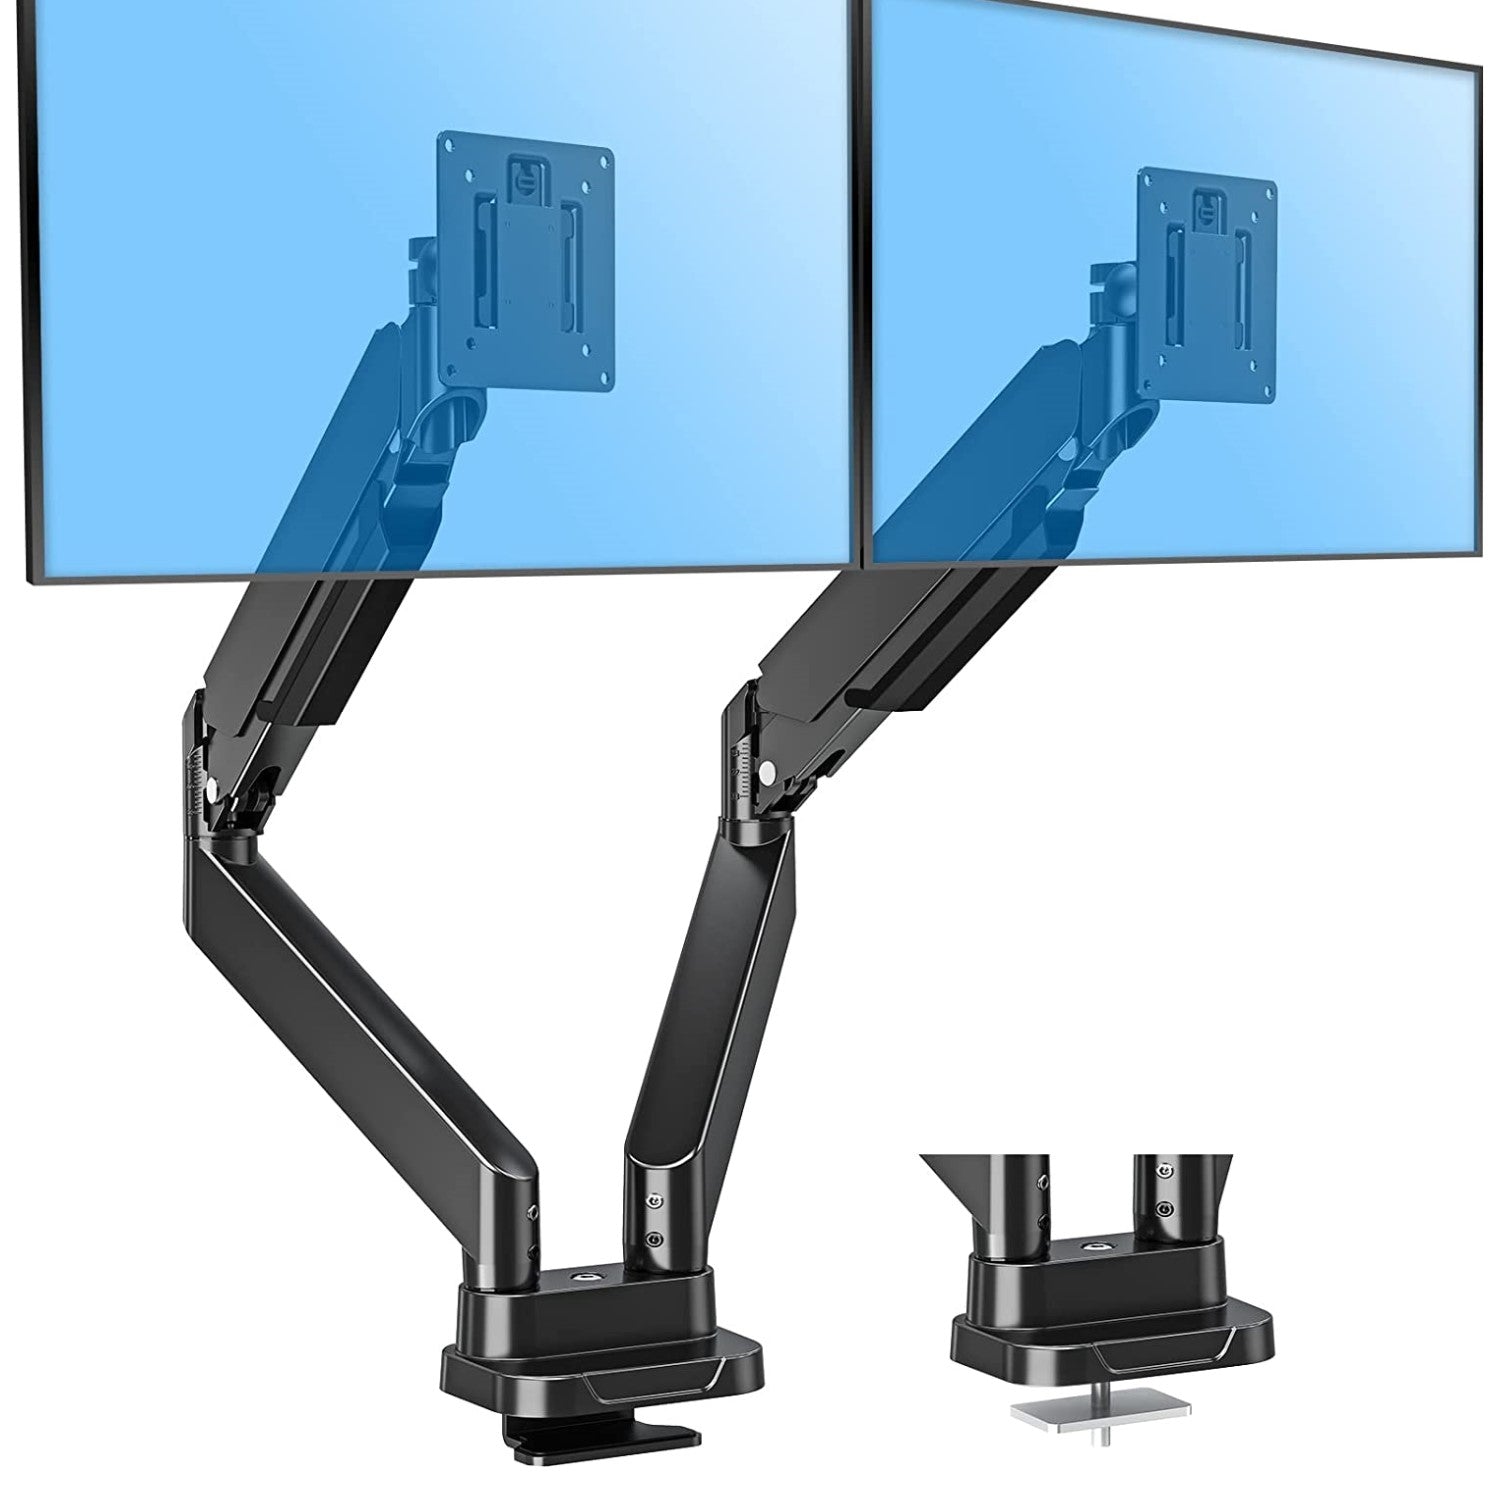 MOUNTUP Dual Monitor Desk Mount with Gas Spring Arm for Max 39Monitor